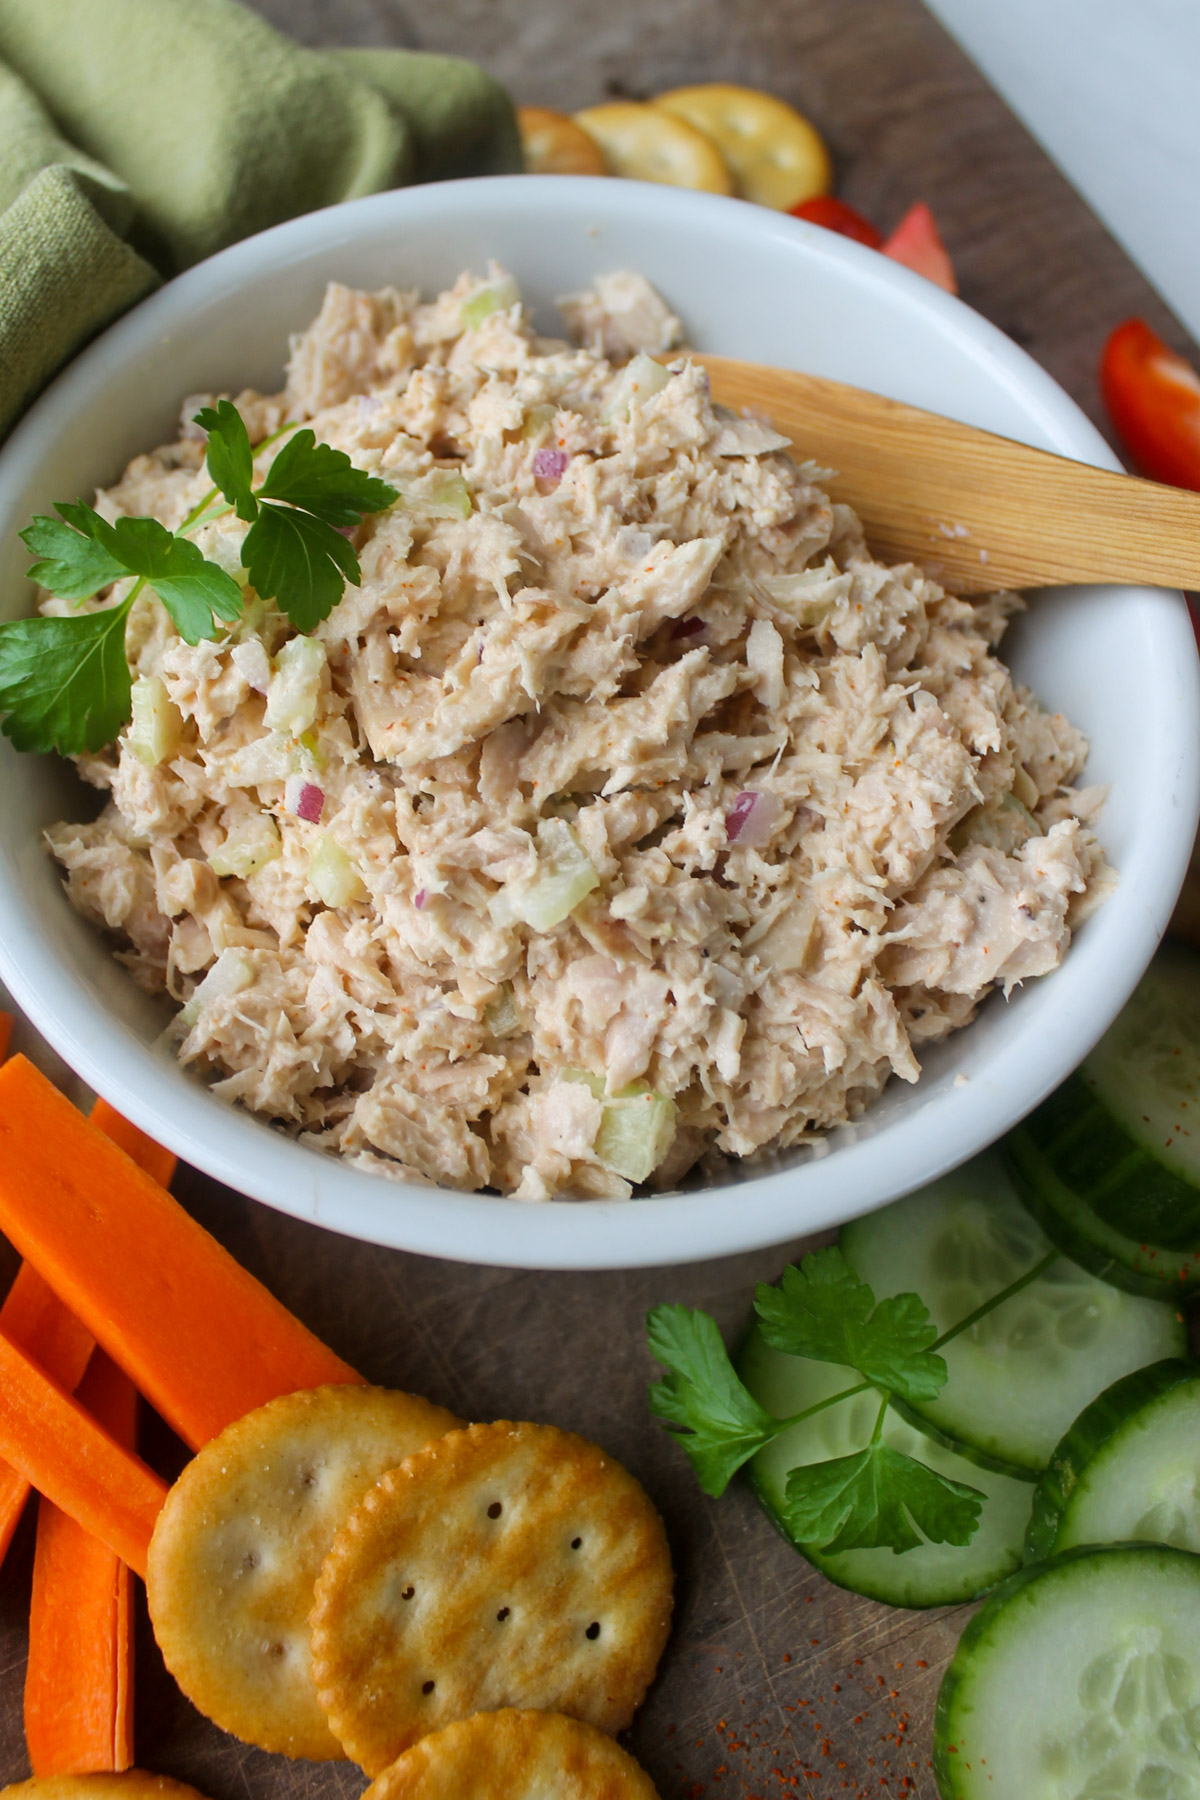 A bowl of tuna salad on a cutting board with cucumber, carrots and crackers.